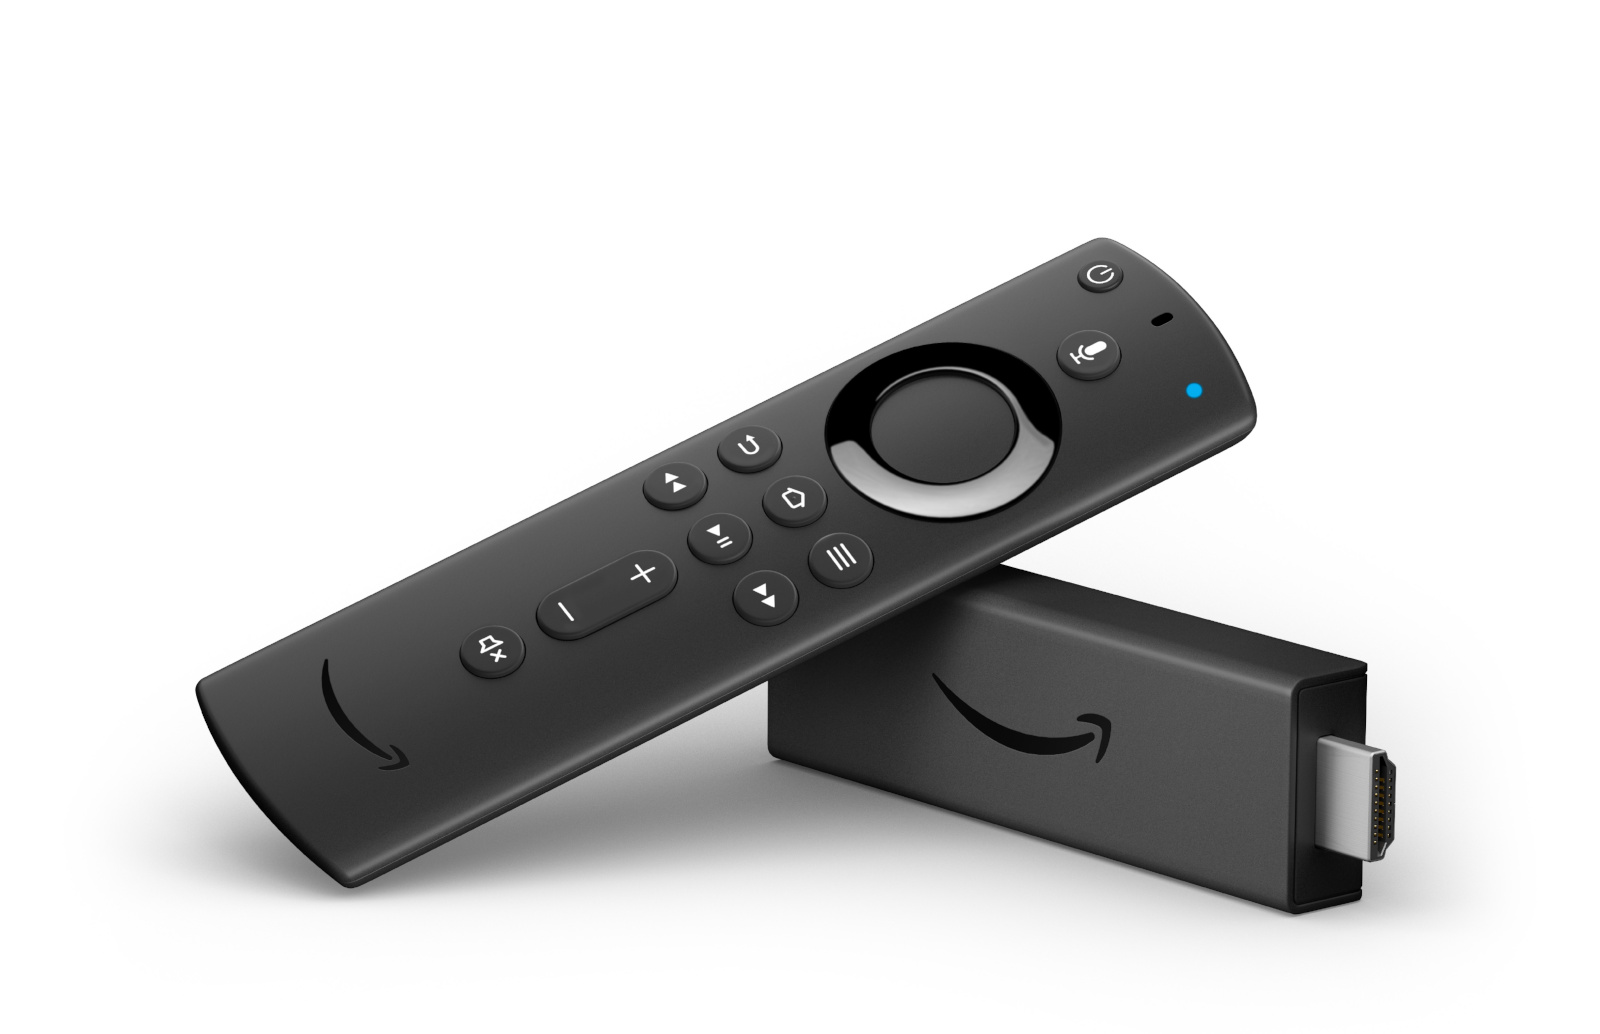 Amazon's Fire TV Stick 4K Max drops back down to an all-time low of $35